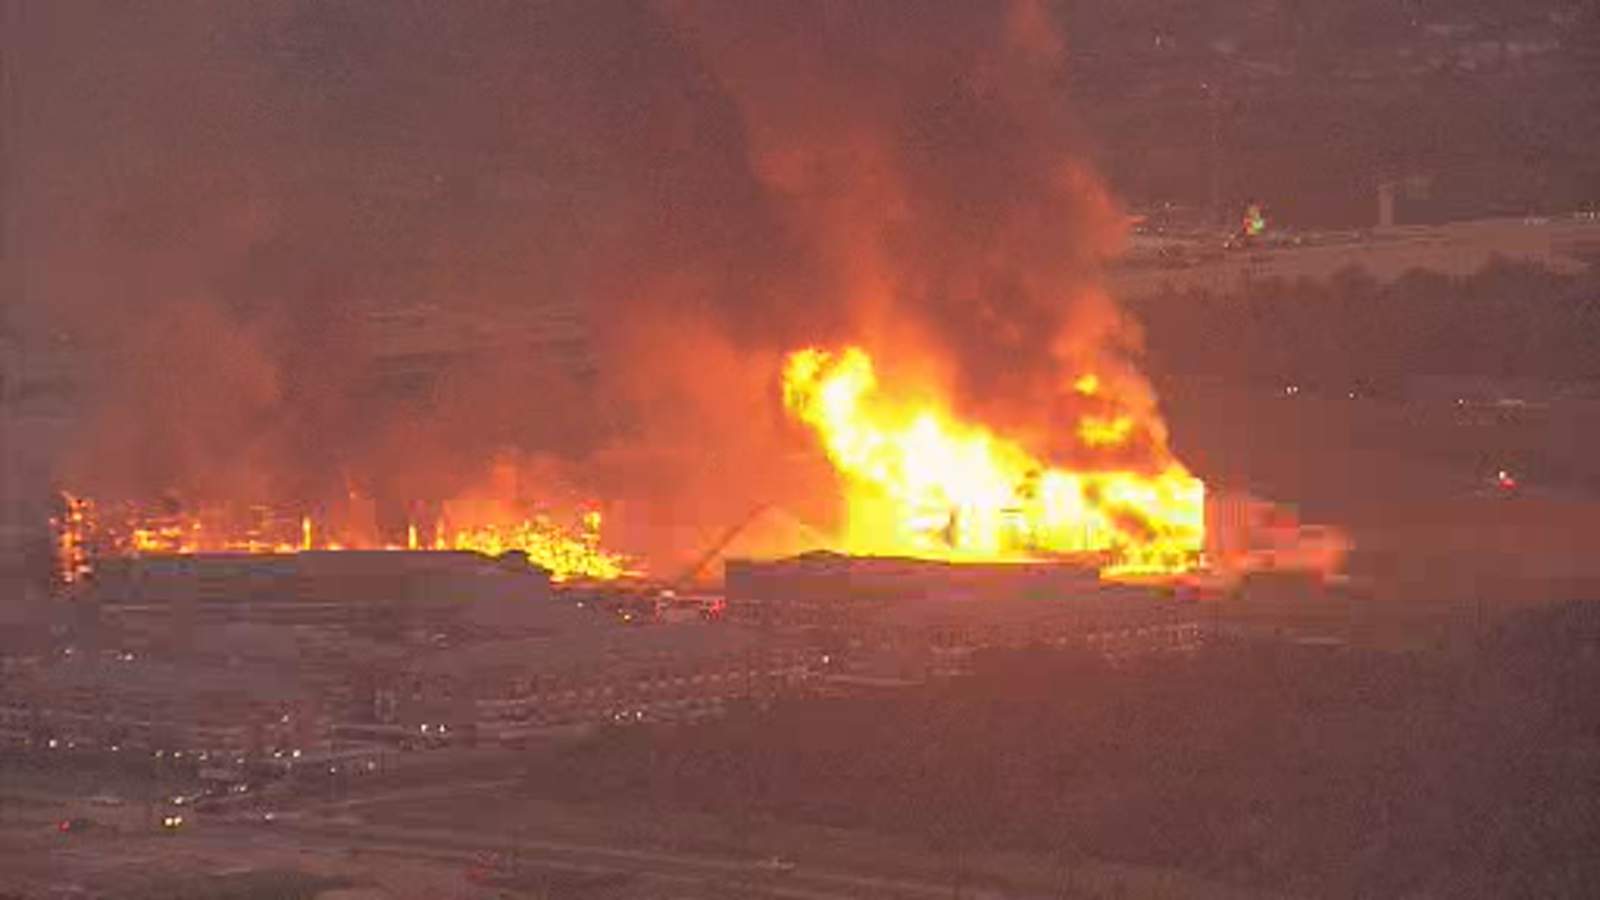 WATCH: Massive fire engulfs apartment complex under construction in Katy area